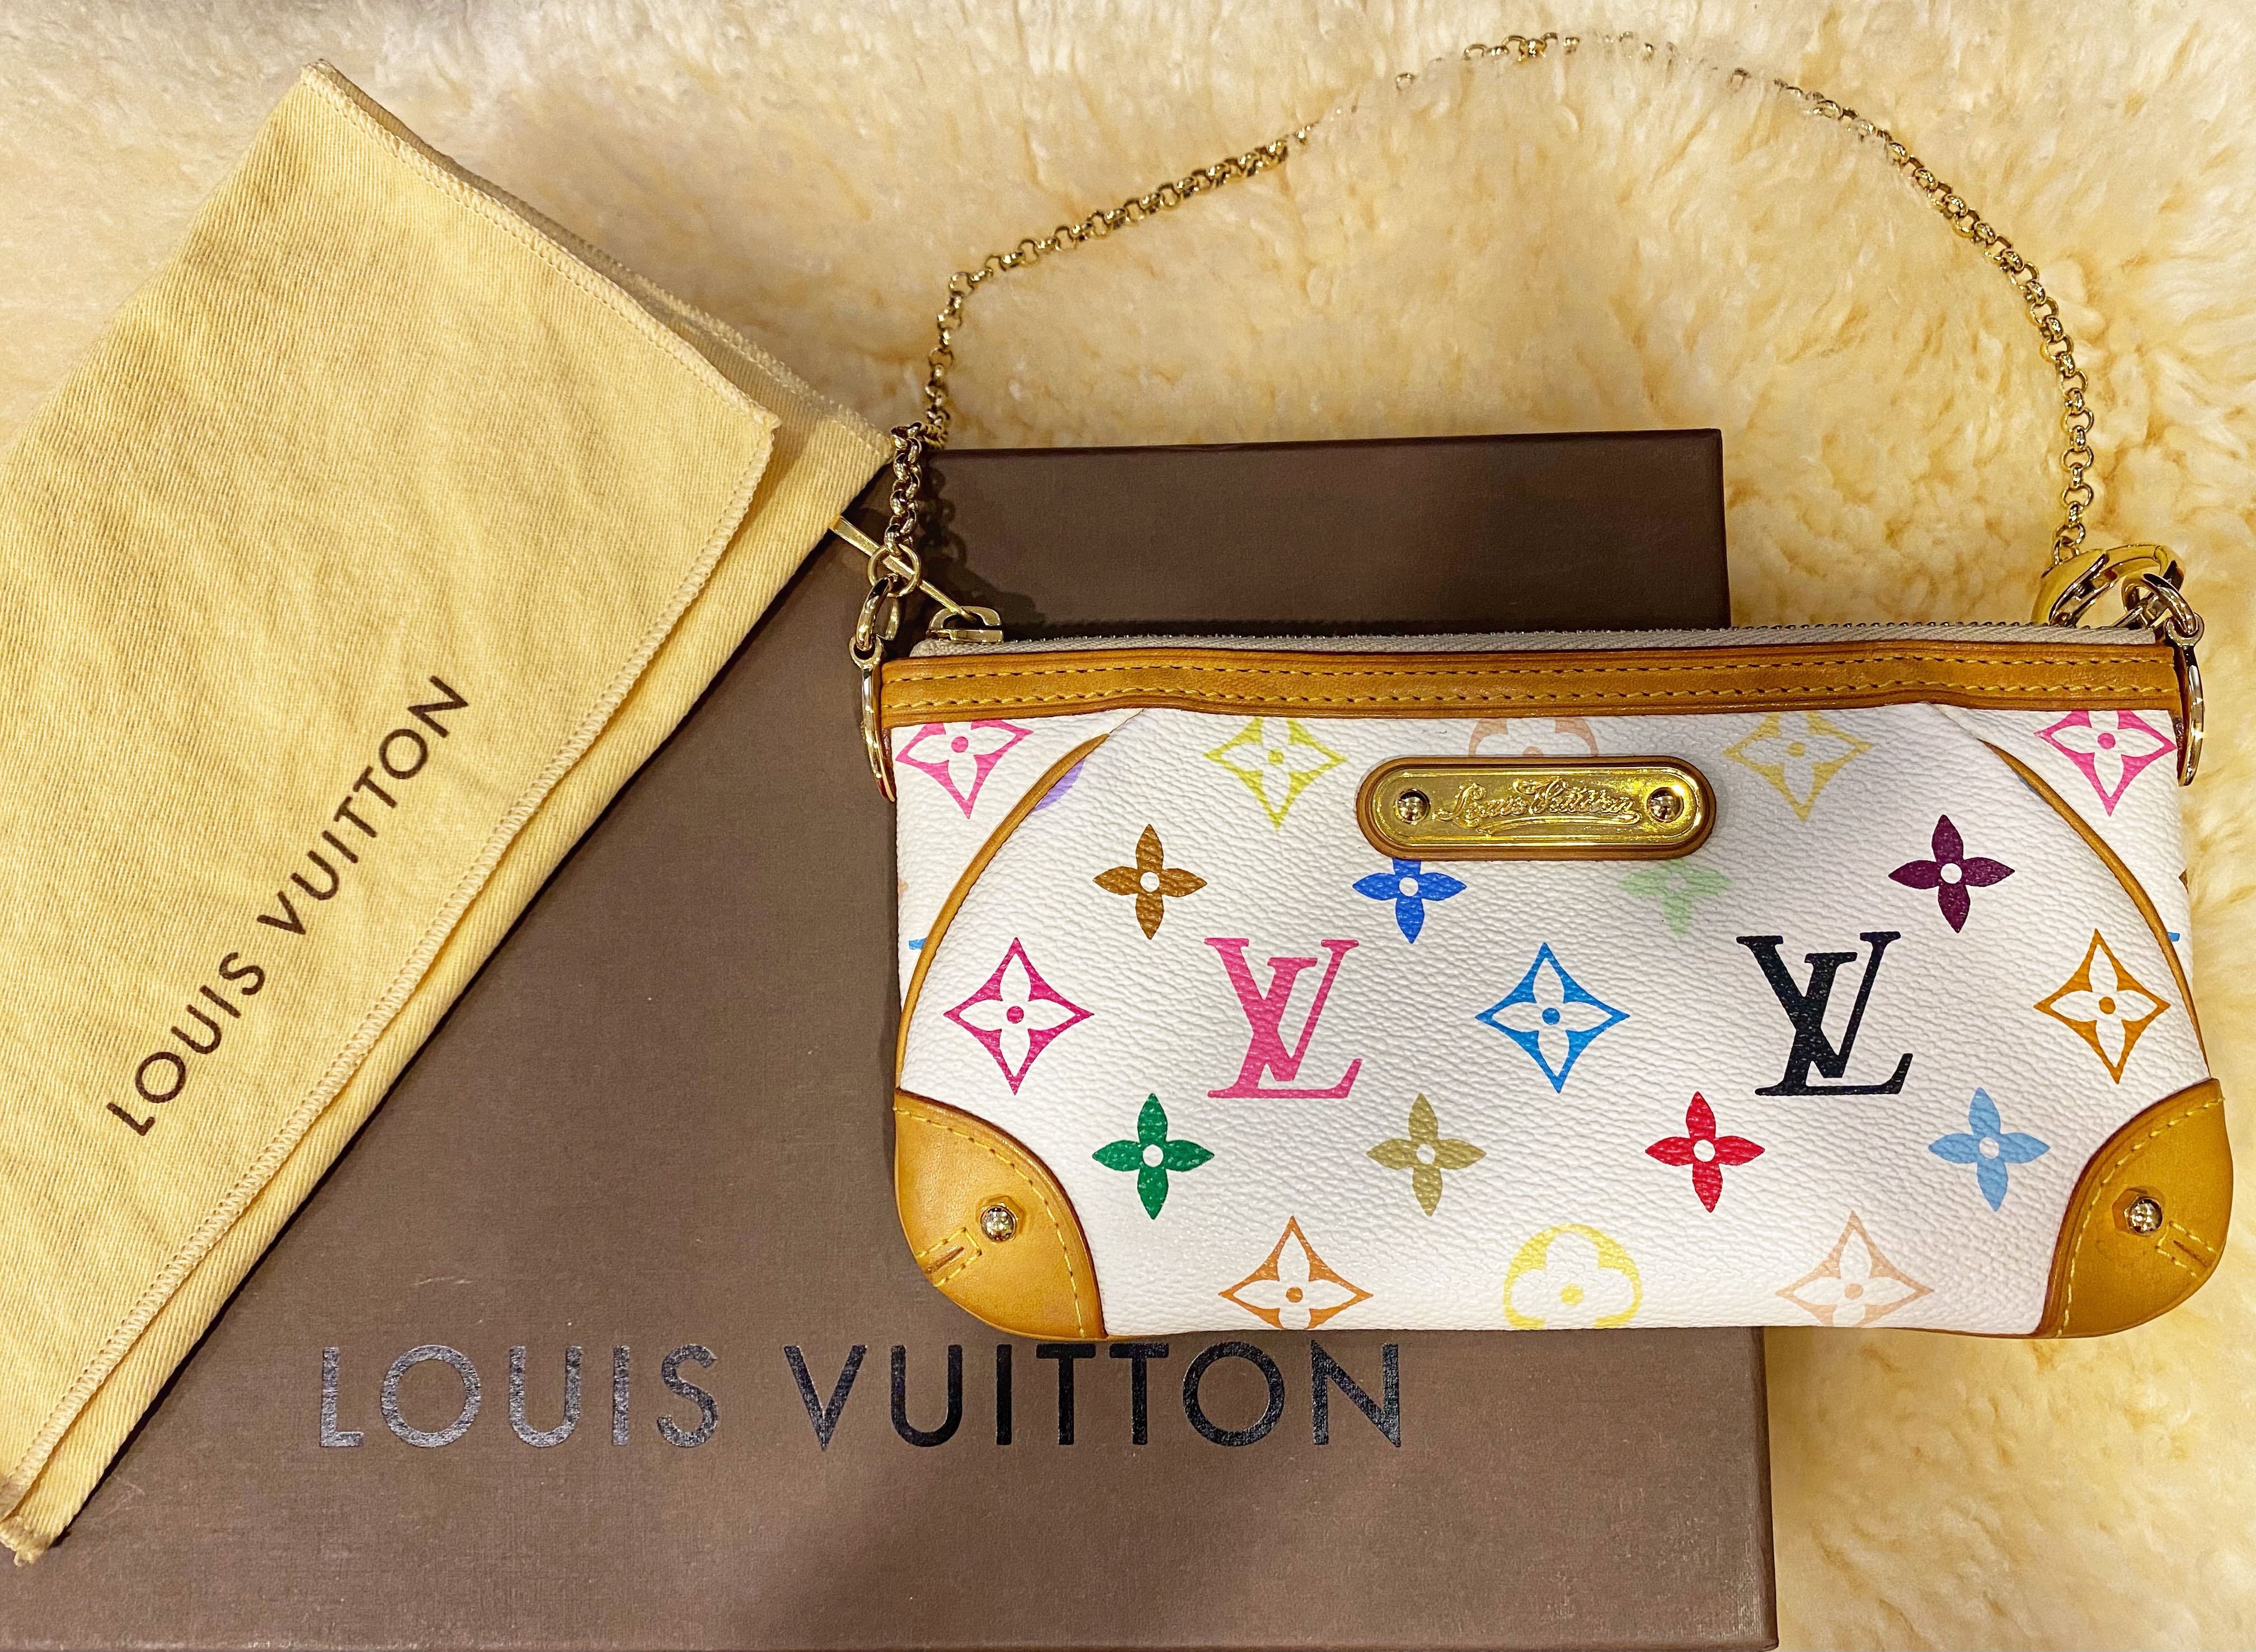 Louis Vuitton Milla Clutch Review - Requested 